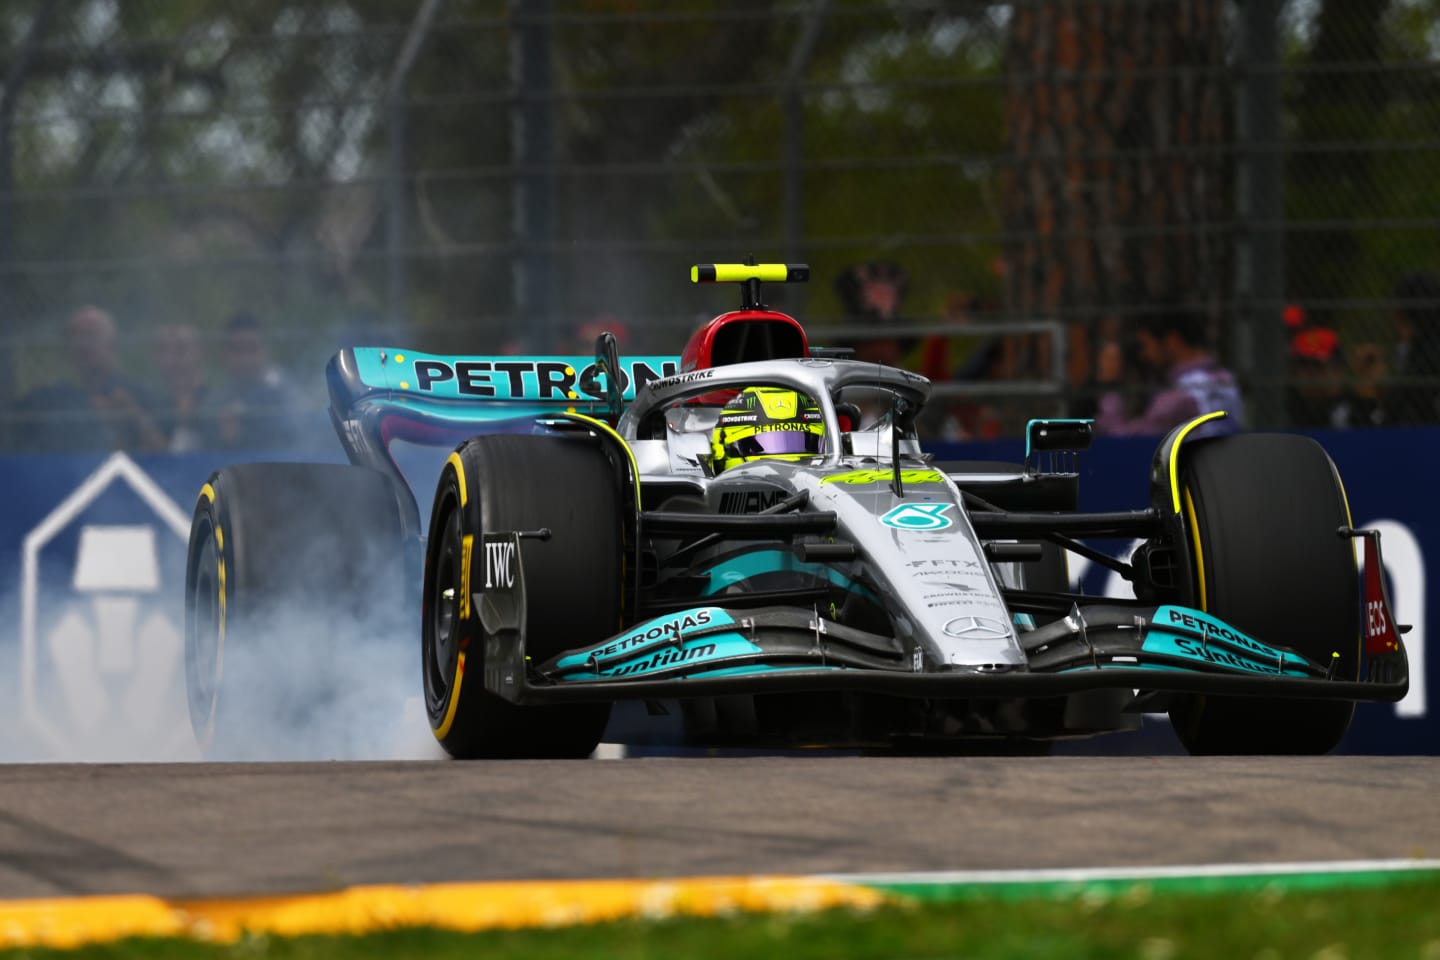 IMOLA, ITALY - APRIL 23: Lewis Hamilton of Great Britain driving the (44) Mercedes AMG Petronas F1